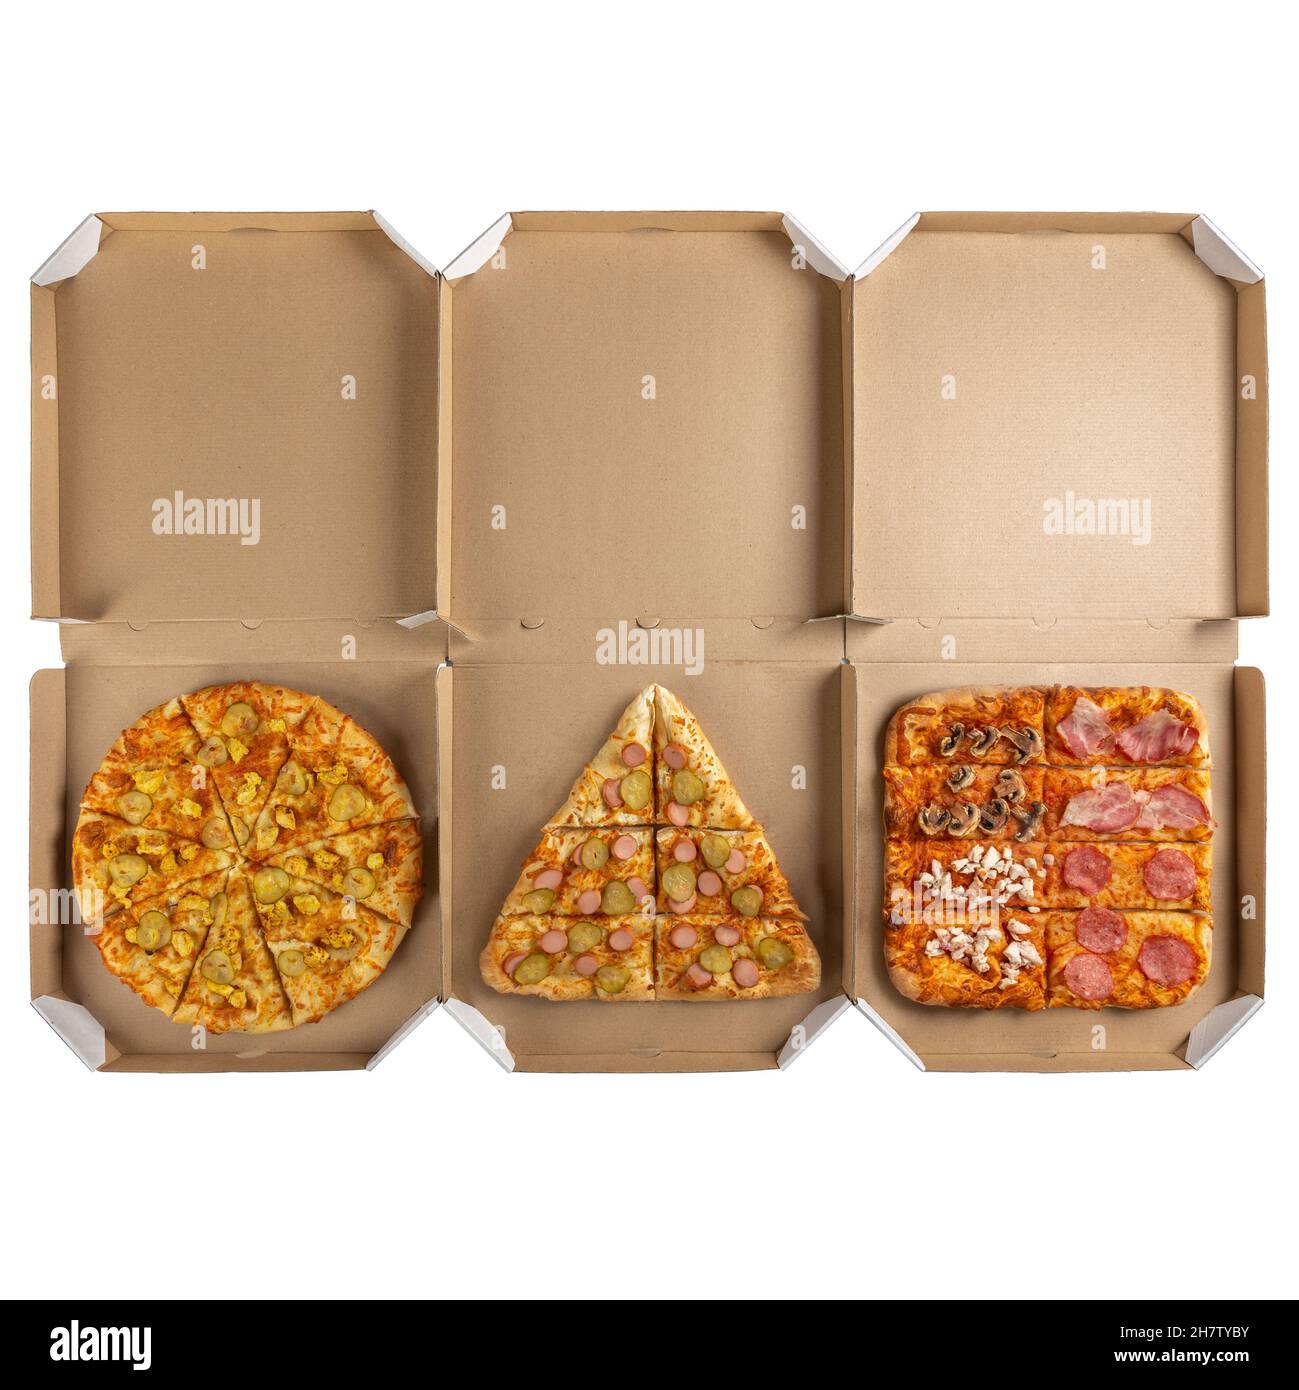 Three pizza boxes of round, triangular and square shape. Conceptual photo based on the famous TV series The Squid Game. Stock Photo